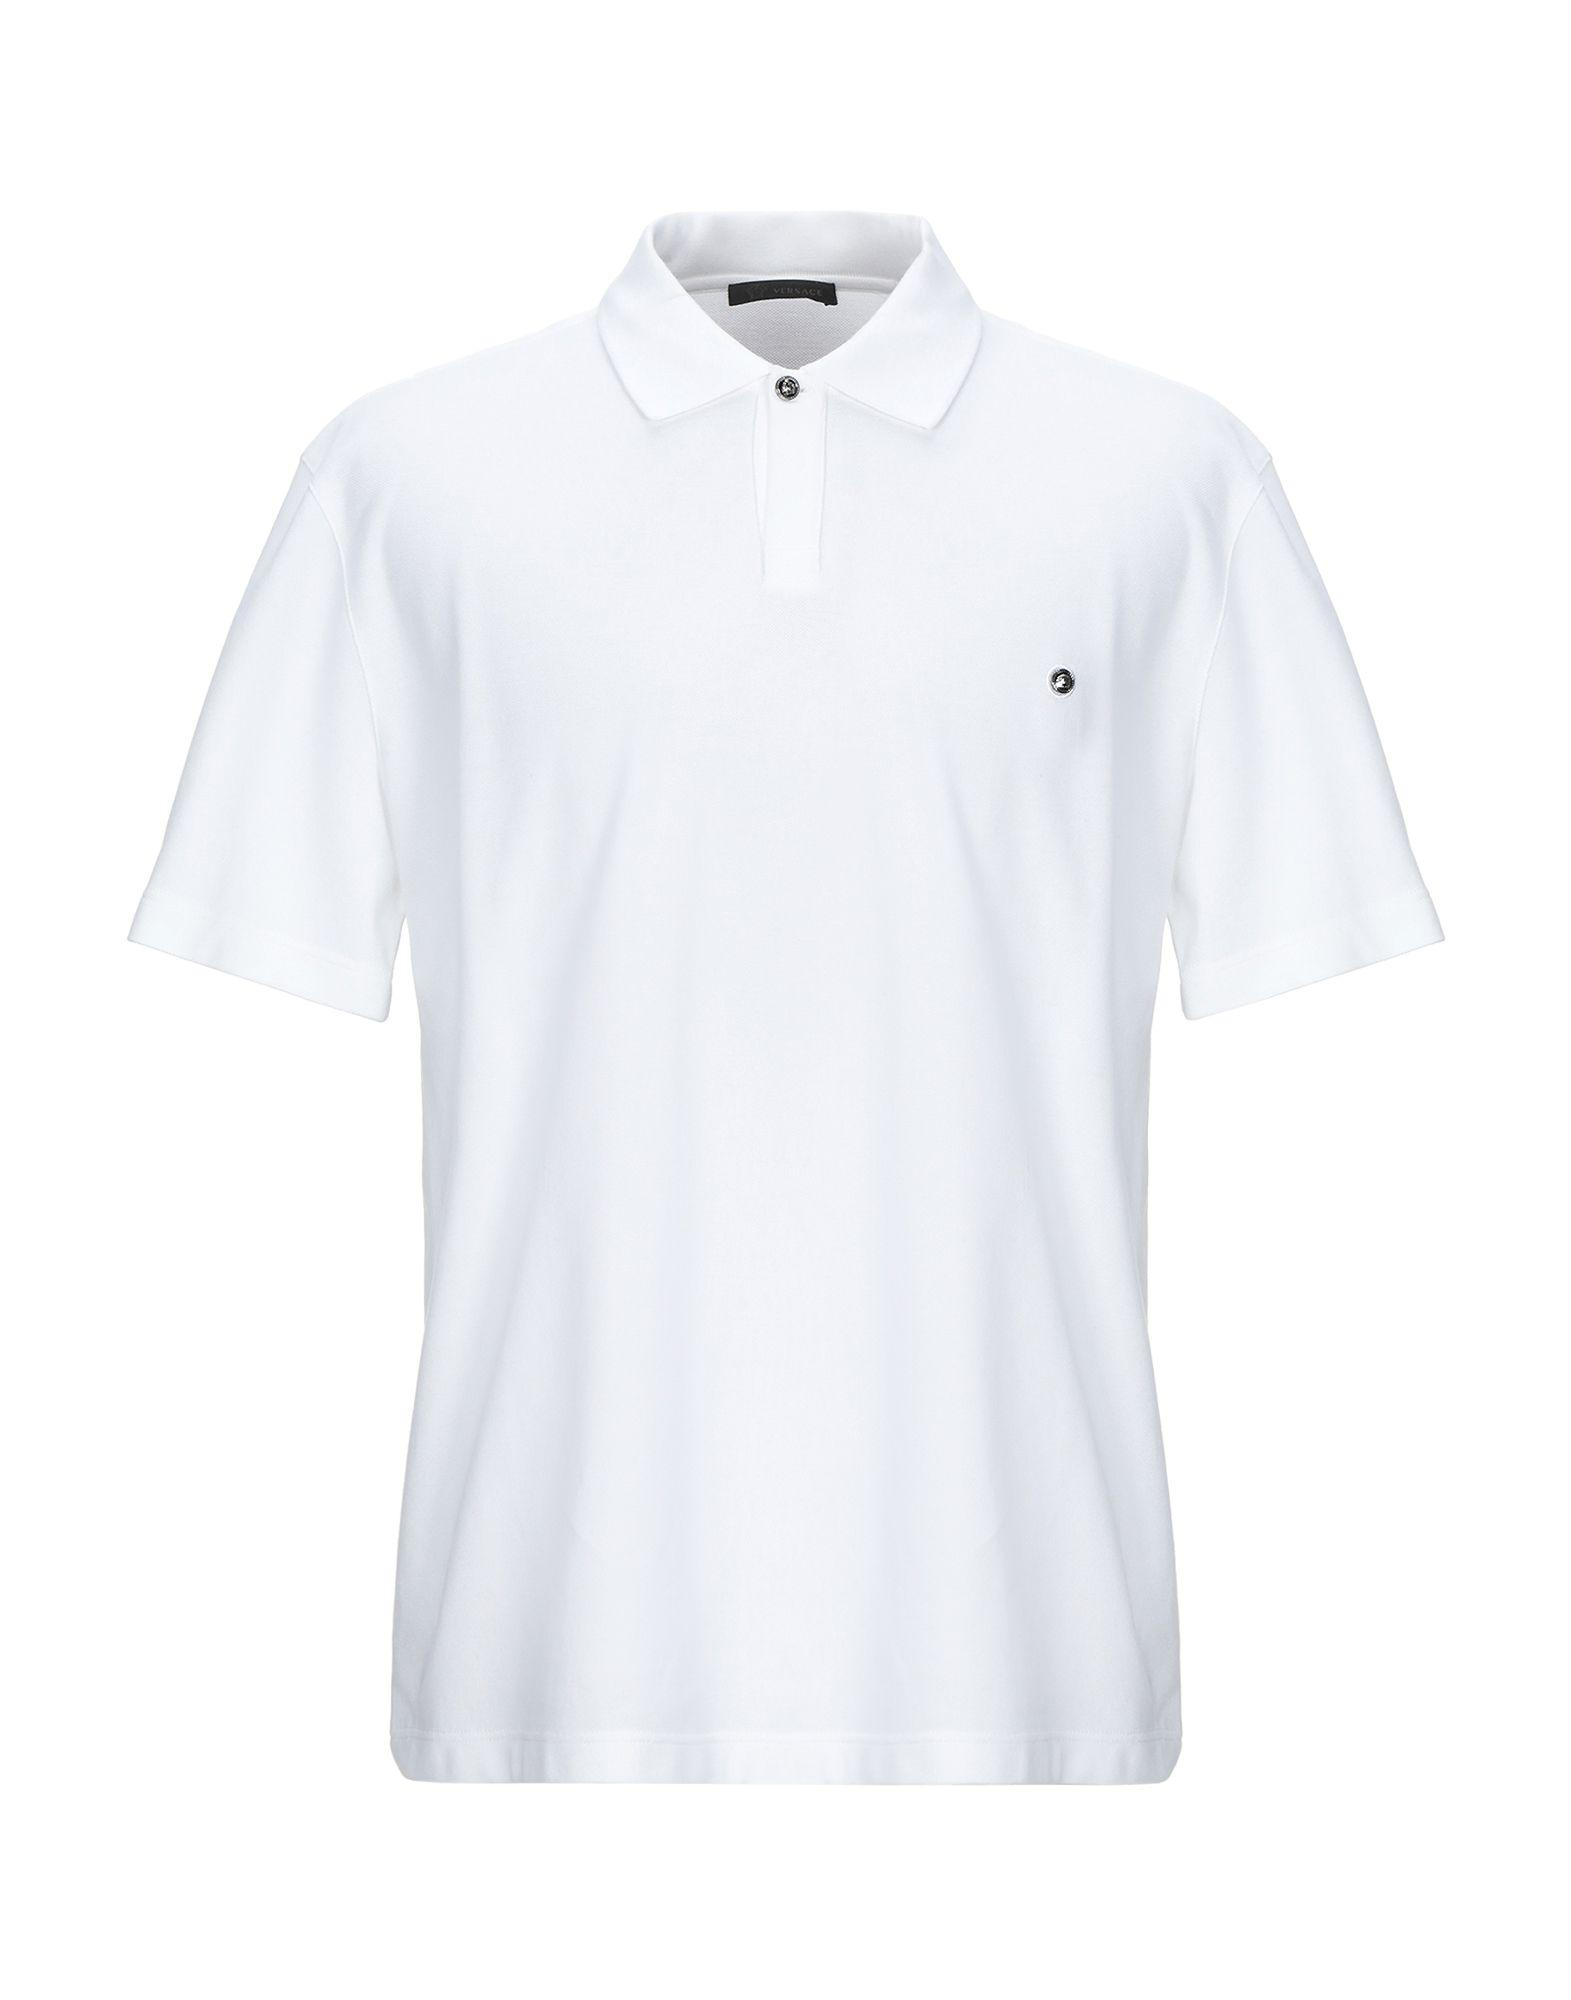 Versace Cotton Polo Shirt in White for Men - Lyst